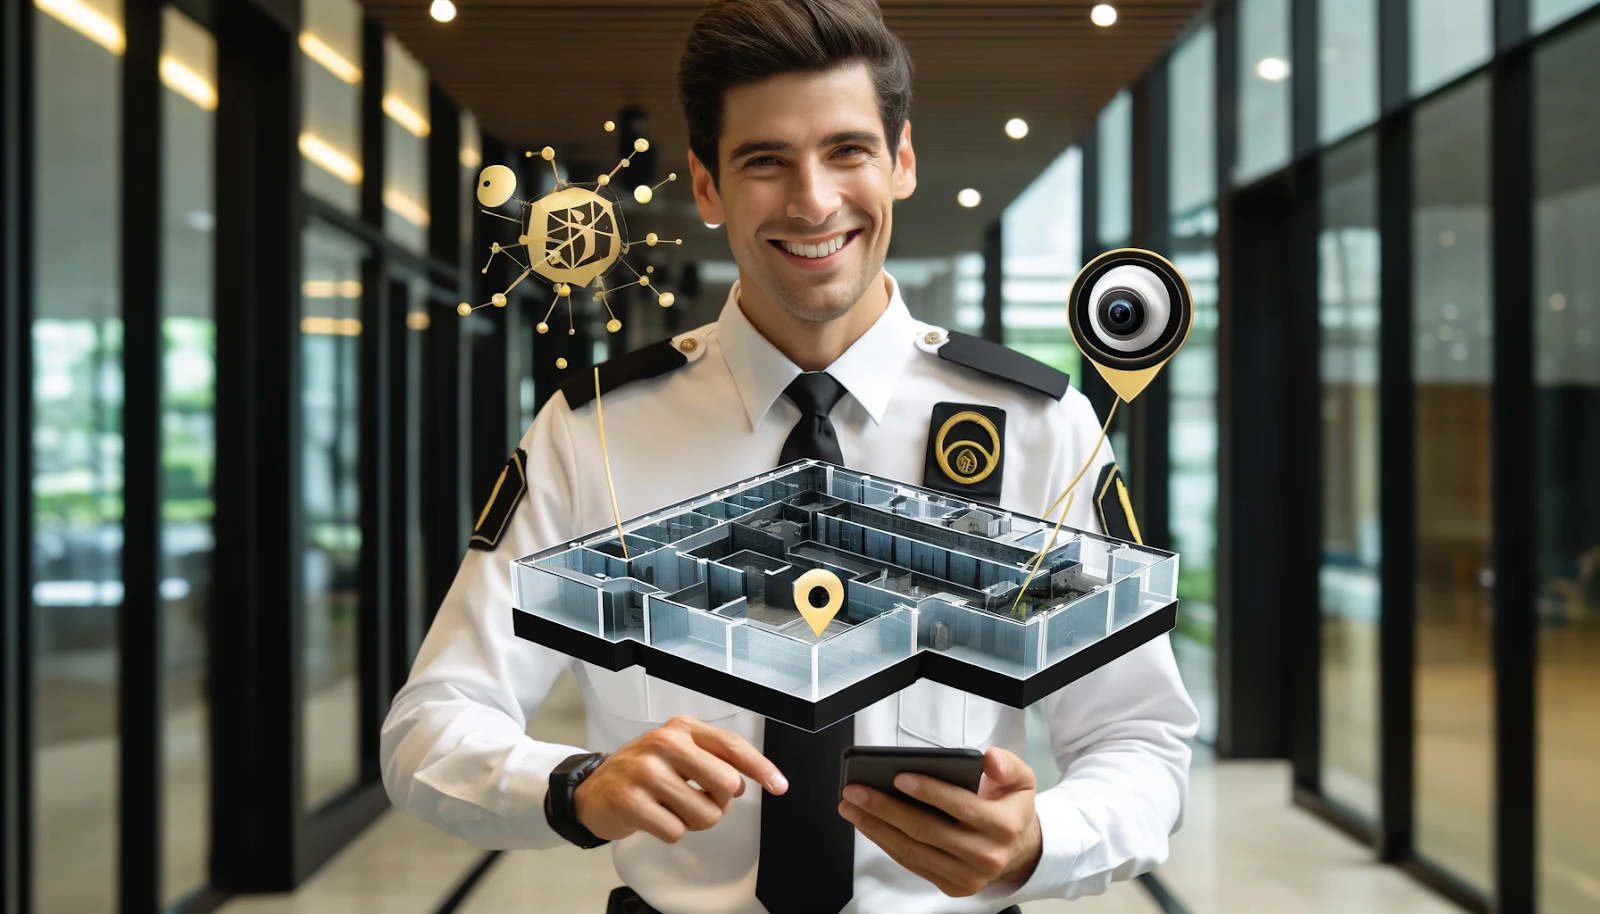 Cheerful security guard using augmented reality for security mapping in a building, with black and gold colors